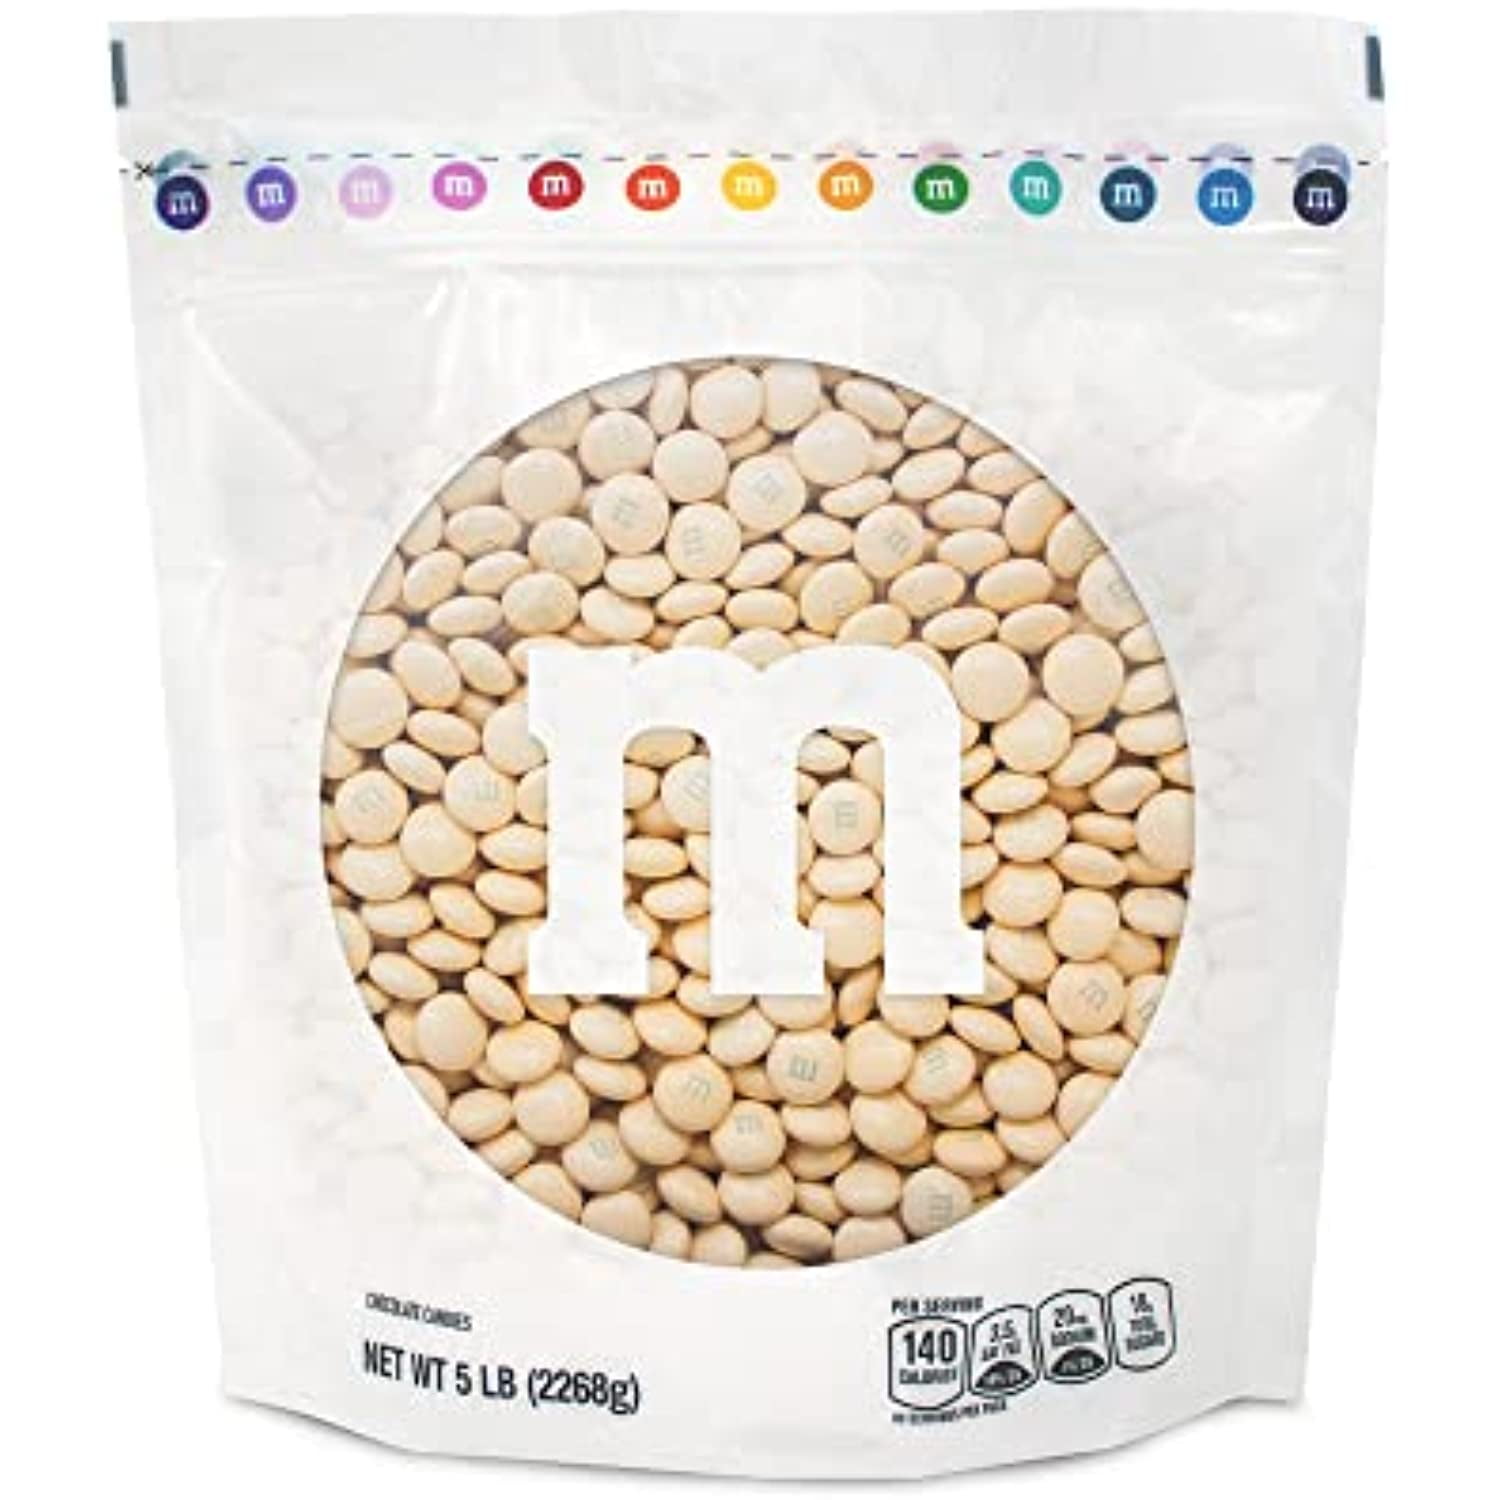 M&M'S Milk Chocolate Pearl Candy - 5Lbs Of Bulk Candy In